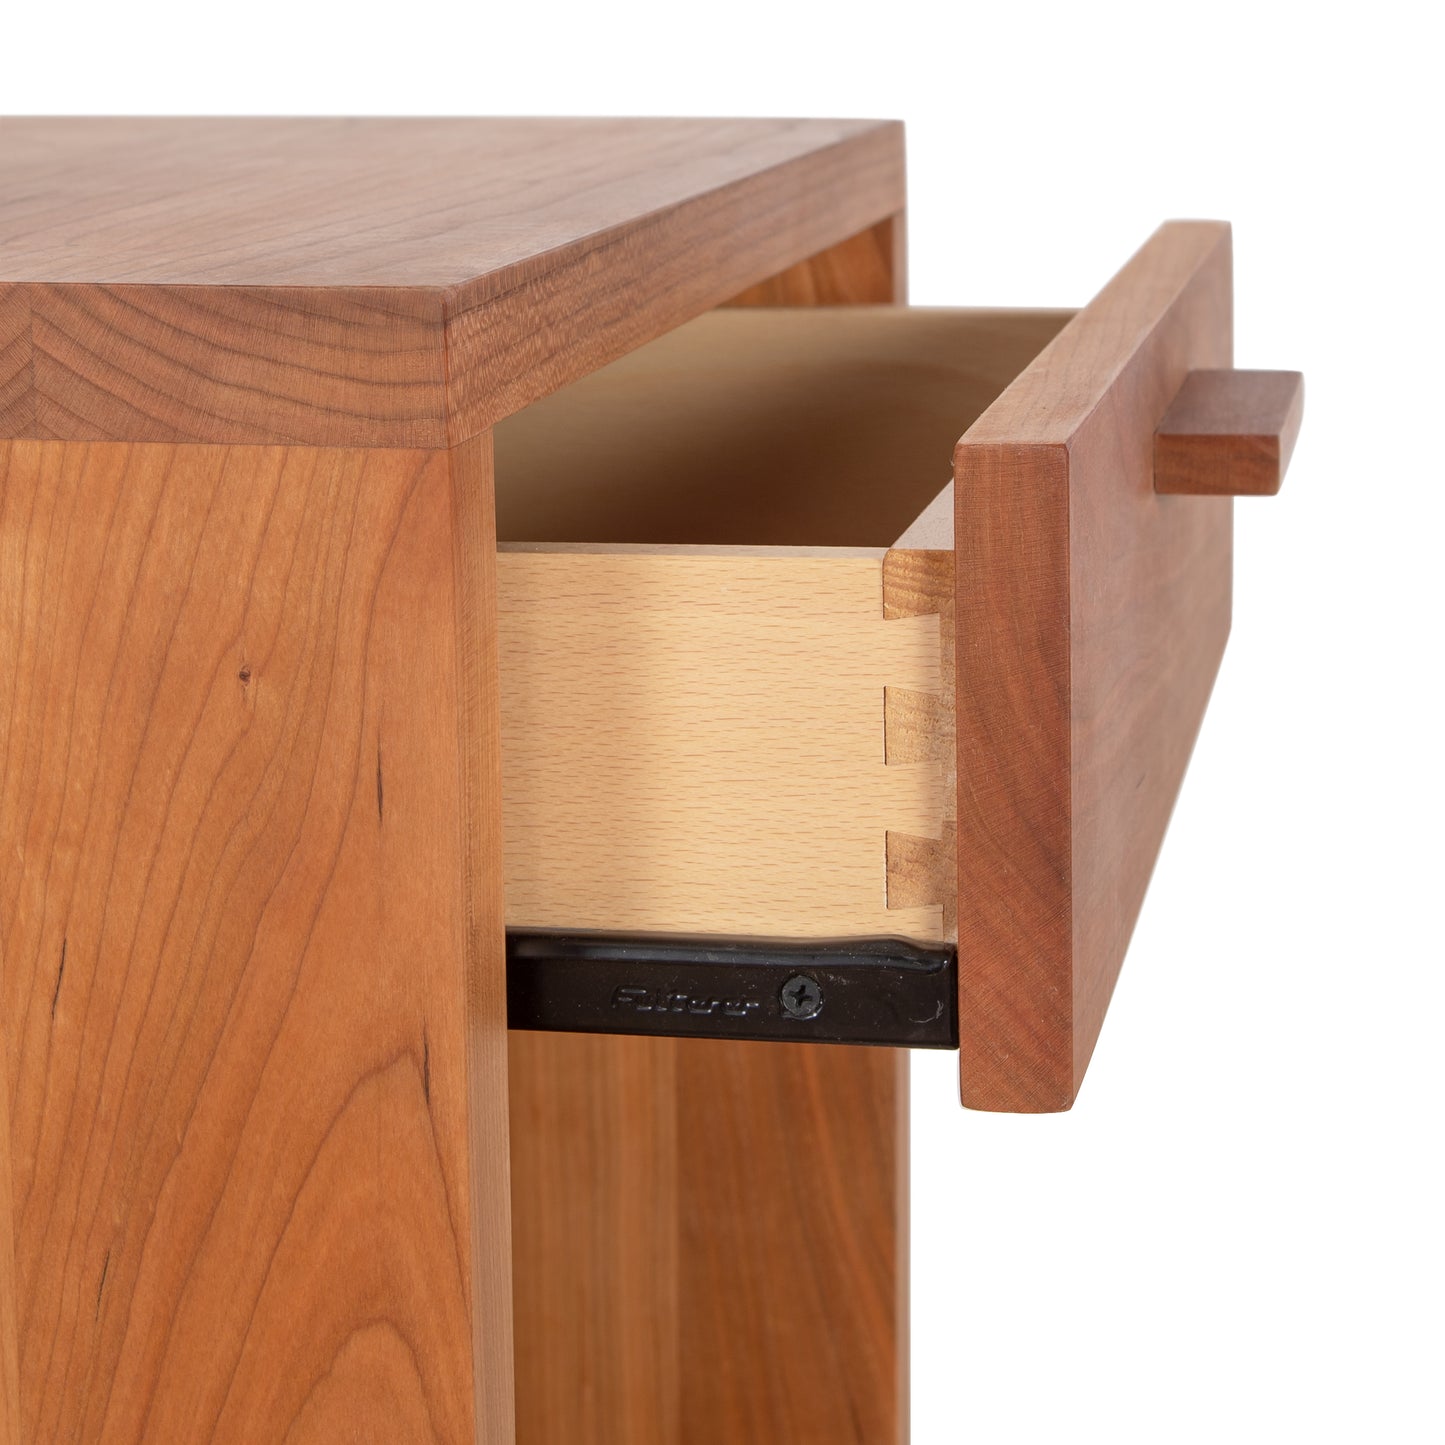 A modern design of the Loft 1-Drawer Enclosed Shelf Nightstand by Vermont Furniture Designs that serves as a stylish bedside table.